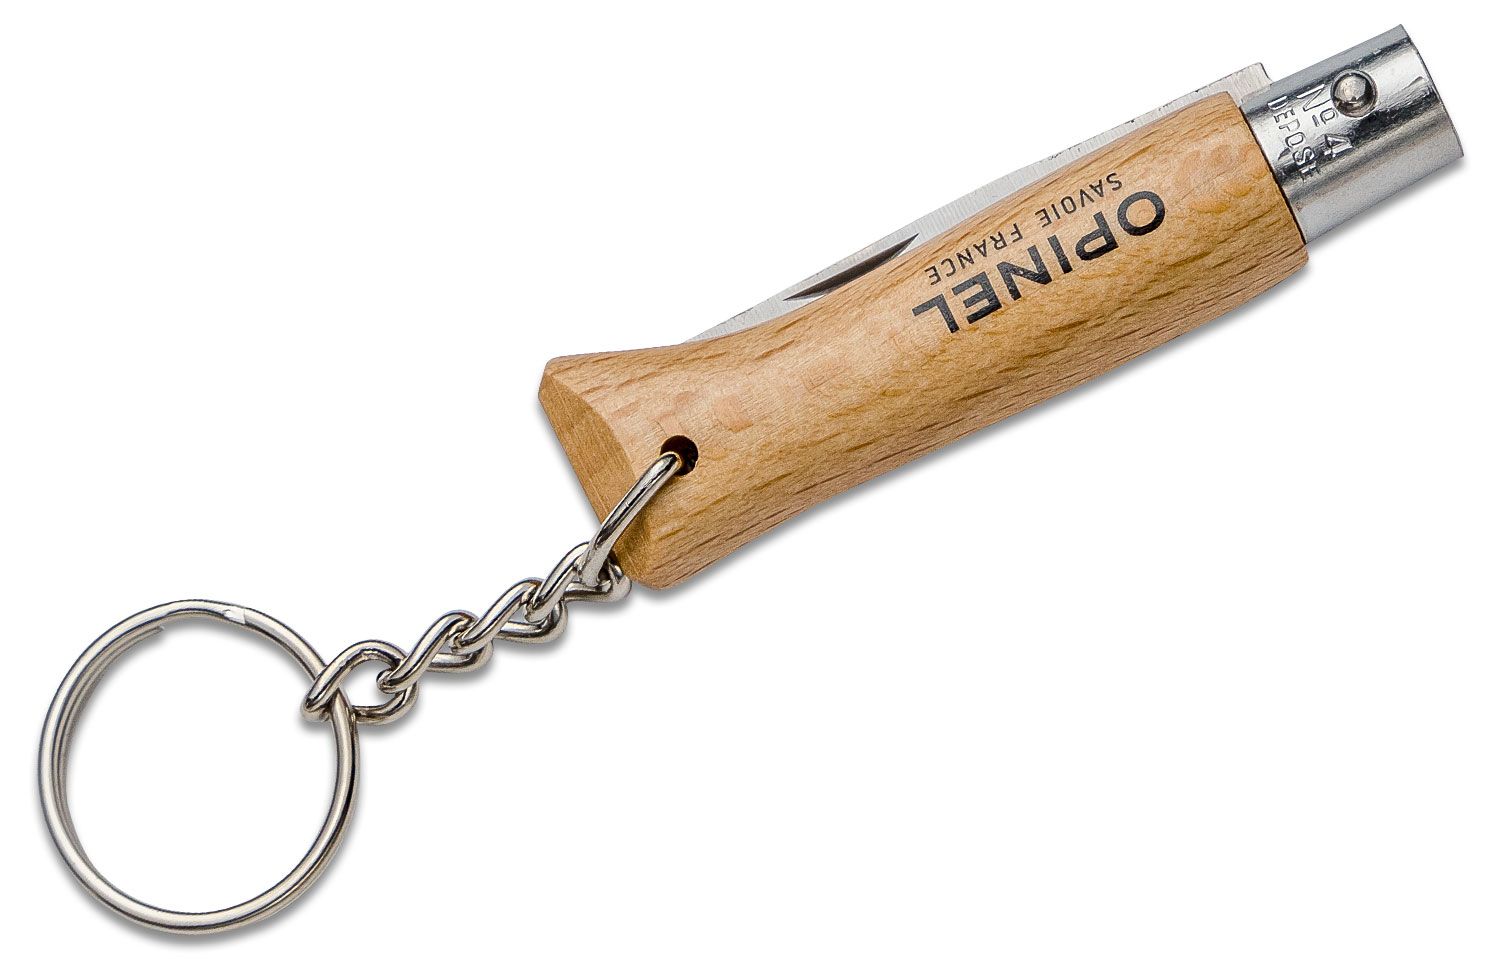 Opinel No.4 Keychain Knife - Stainless